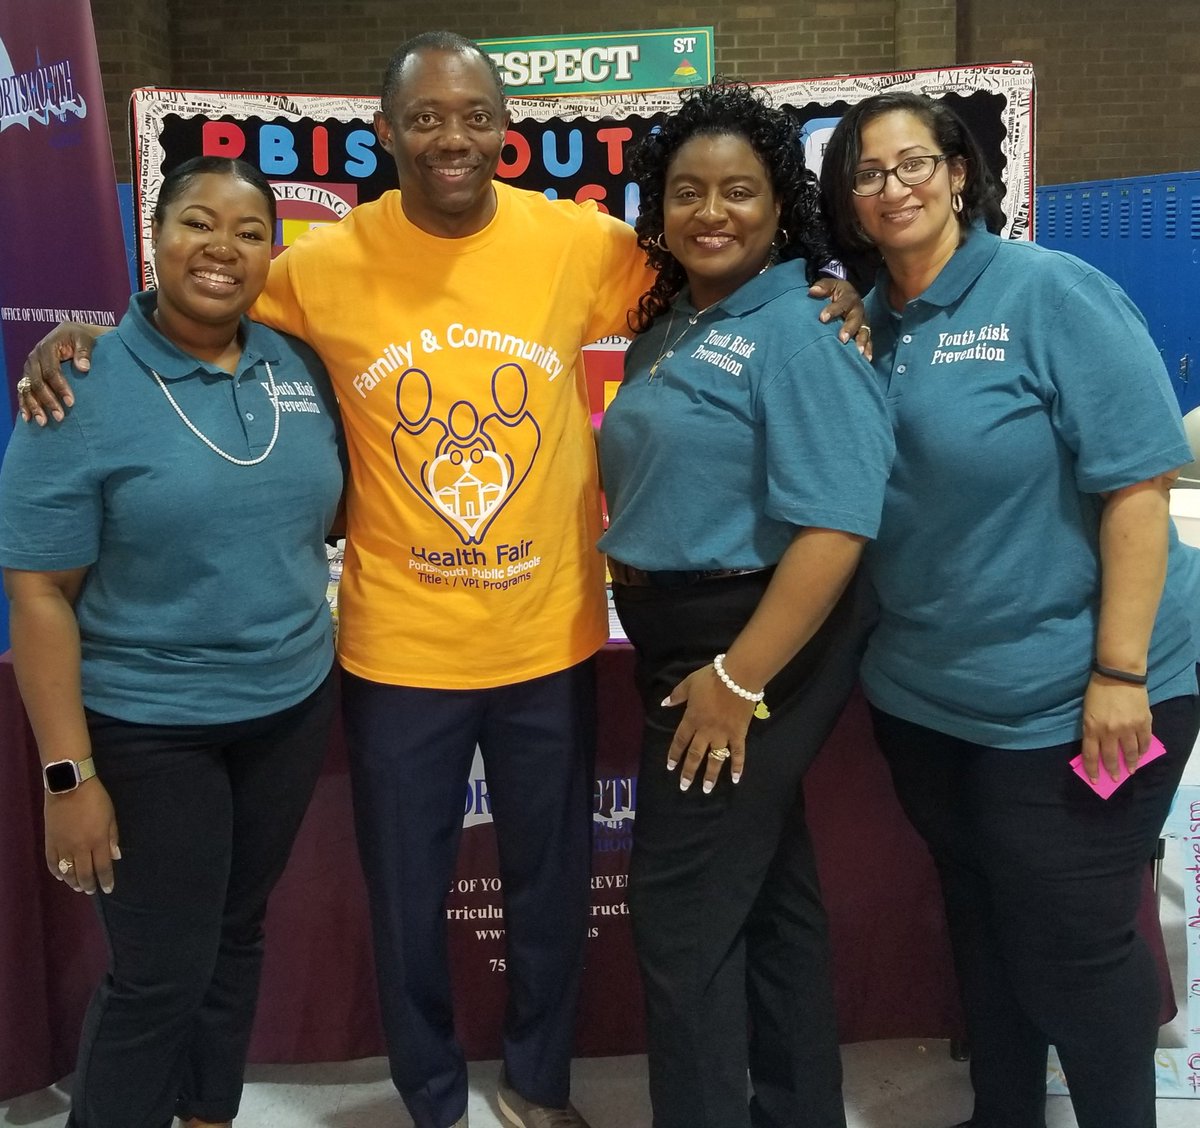 Portsmouth Superintendent Dr. Bracy and Youth Risk Prevention at the Title 1 Health Fair 2019 .@PortsVASchools .@ebracyPPS .@in8days